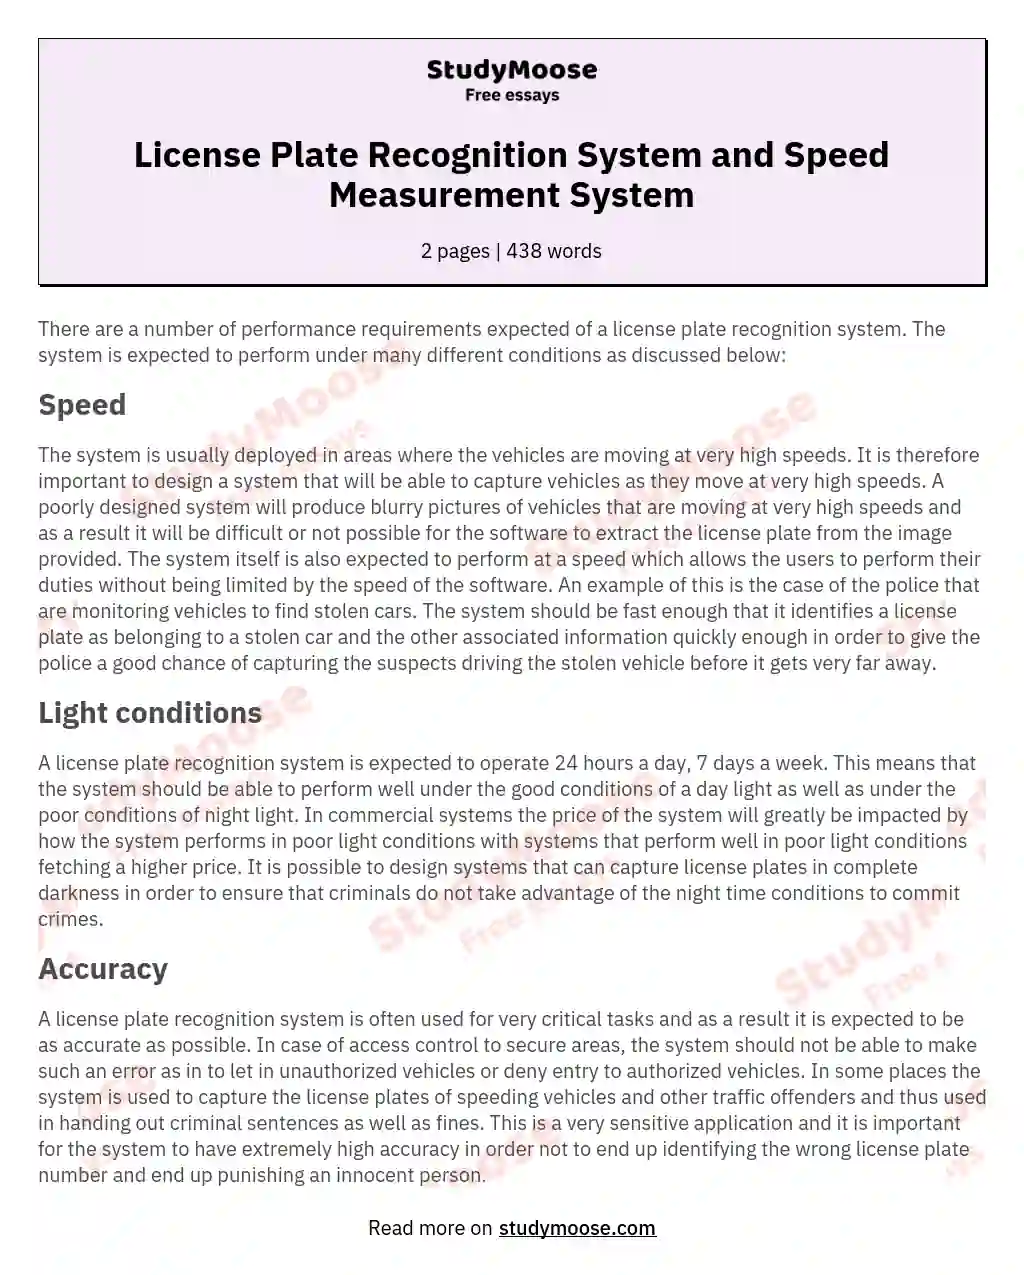 License Plate Recognition System and Speed Measurement System